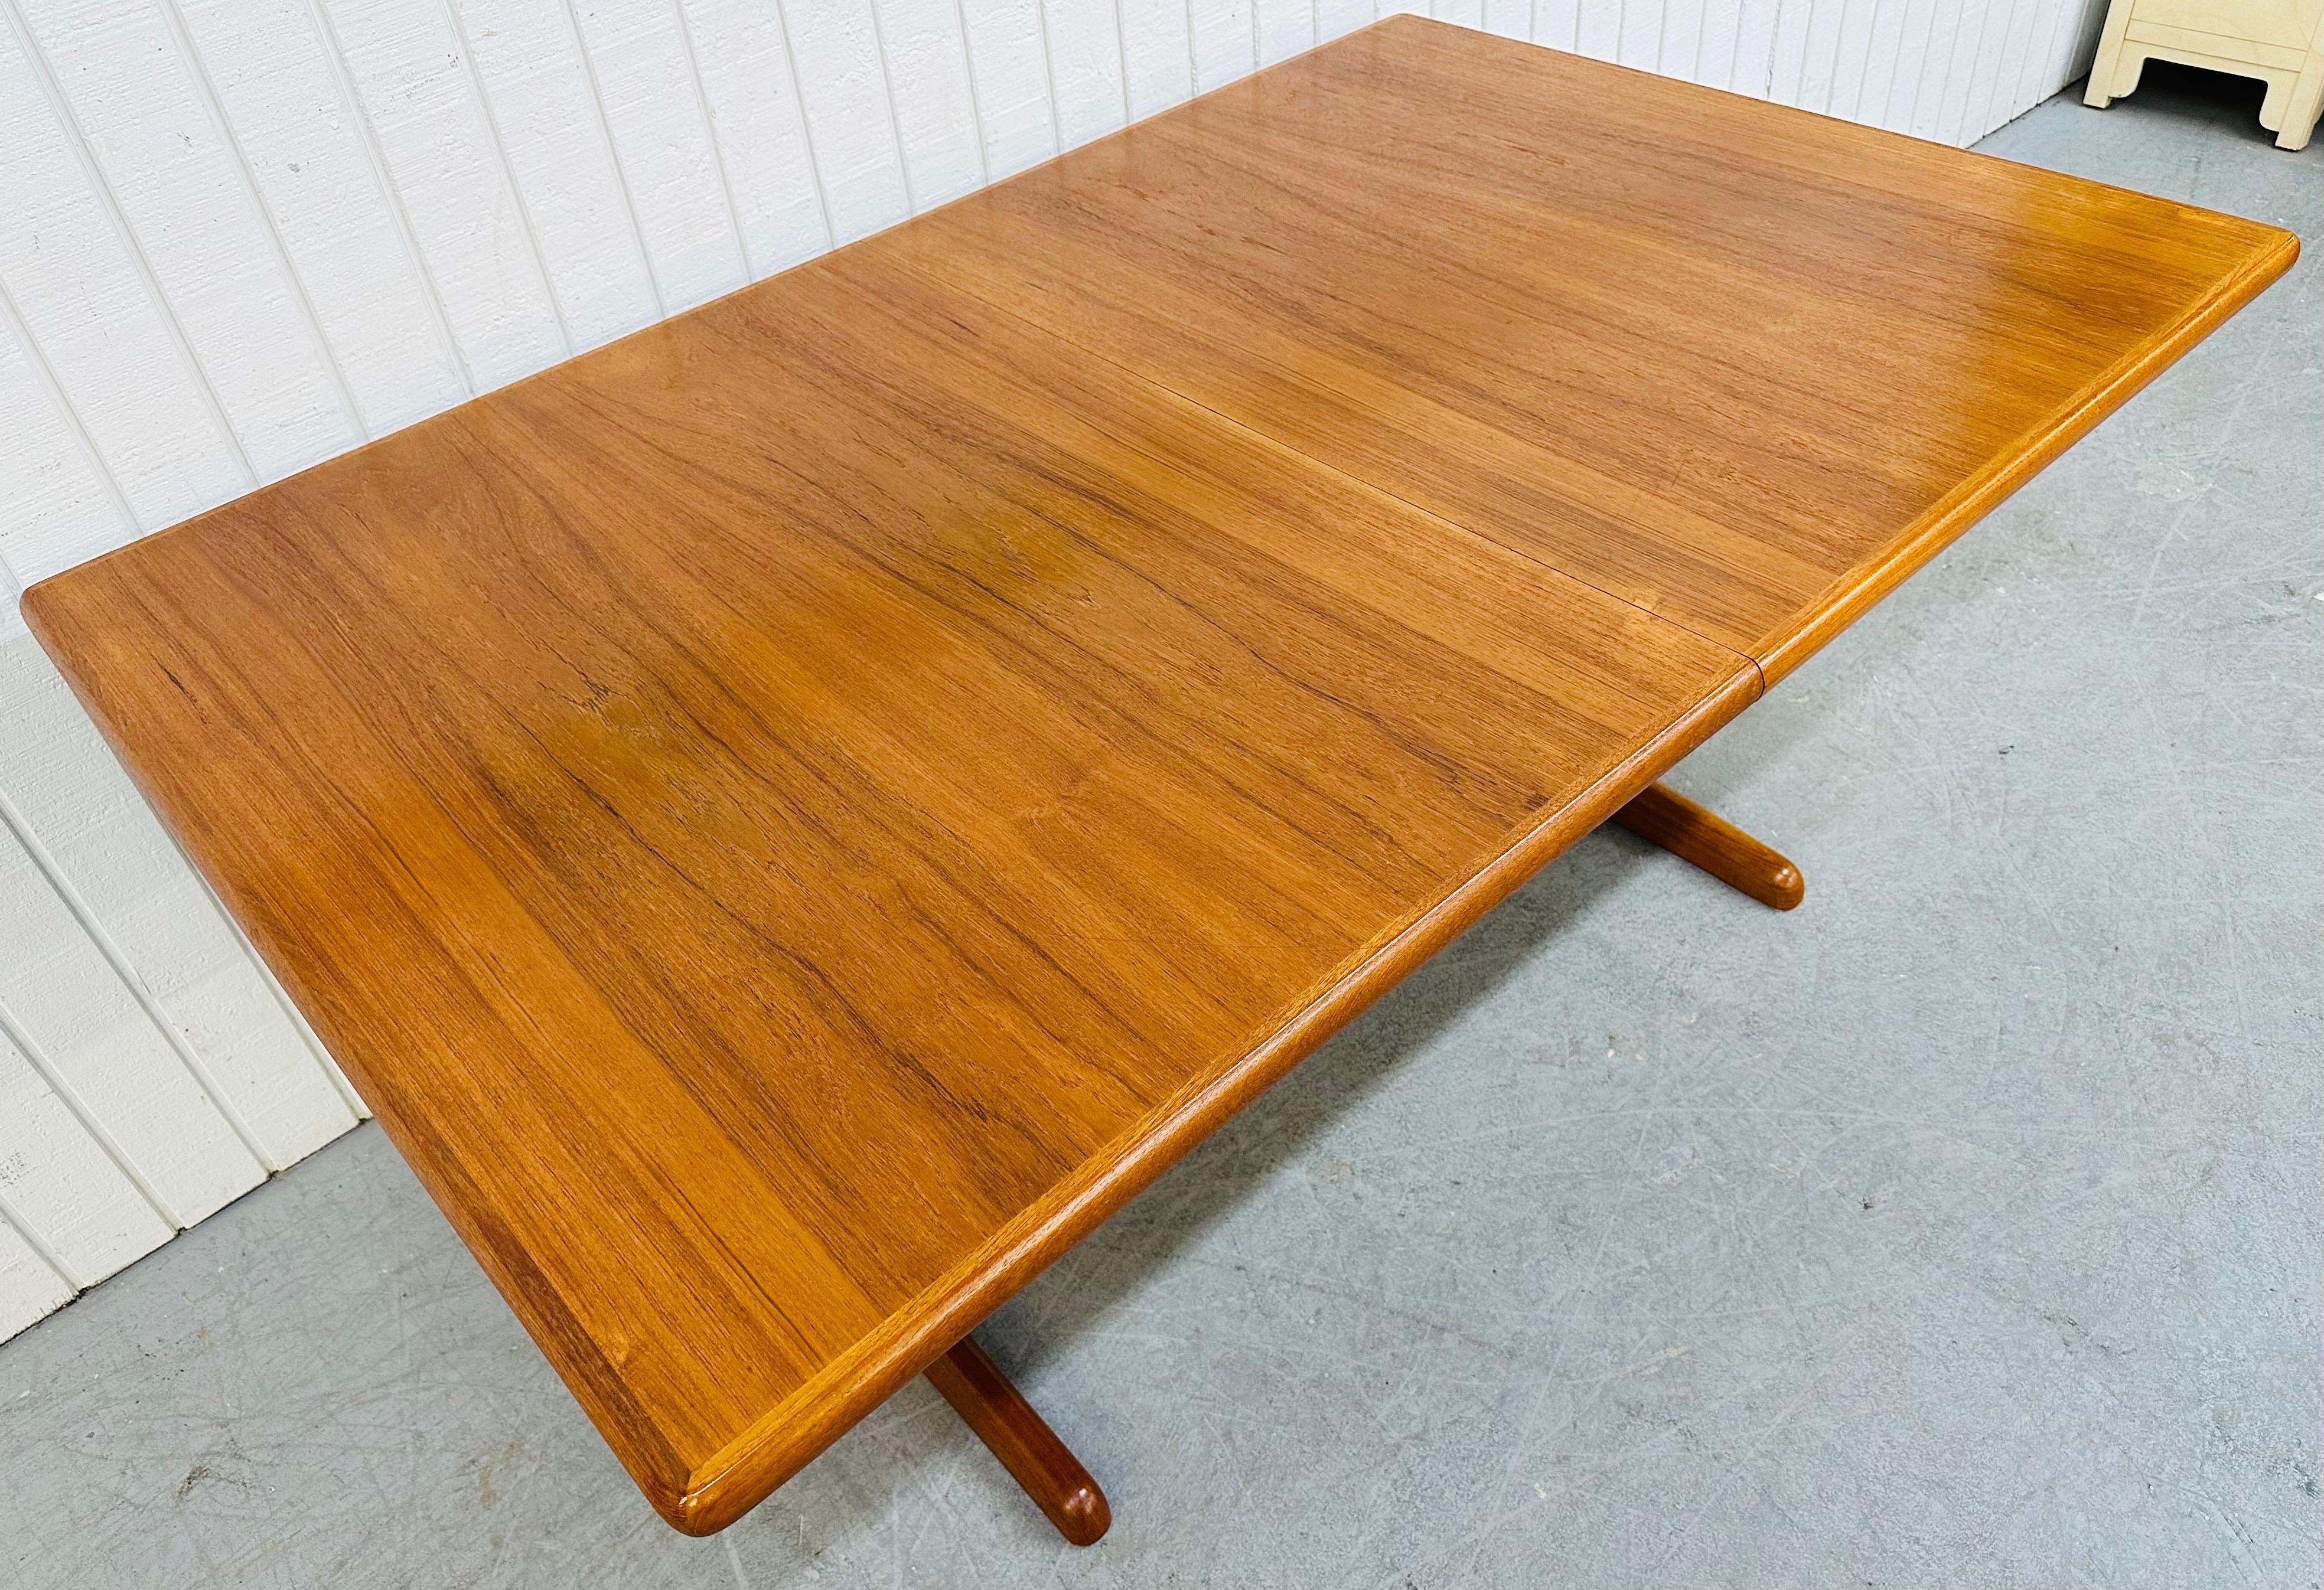 This listing is for a Vintage Danish Modern Teak Dining Table. Featuring a rectangular top, straight line pedestal base, hidden pop-up leaves that extend the table up to 96” L, and a beautiful teak finish.